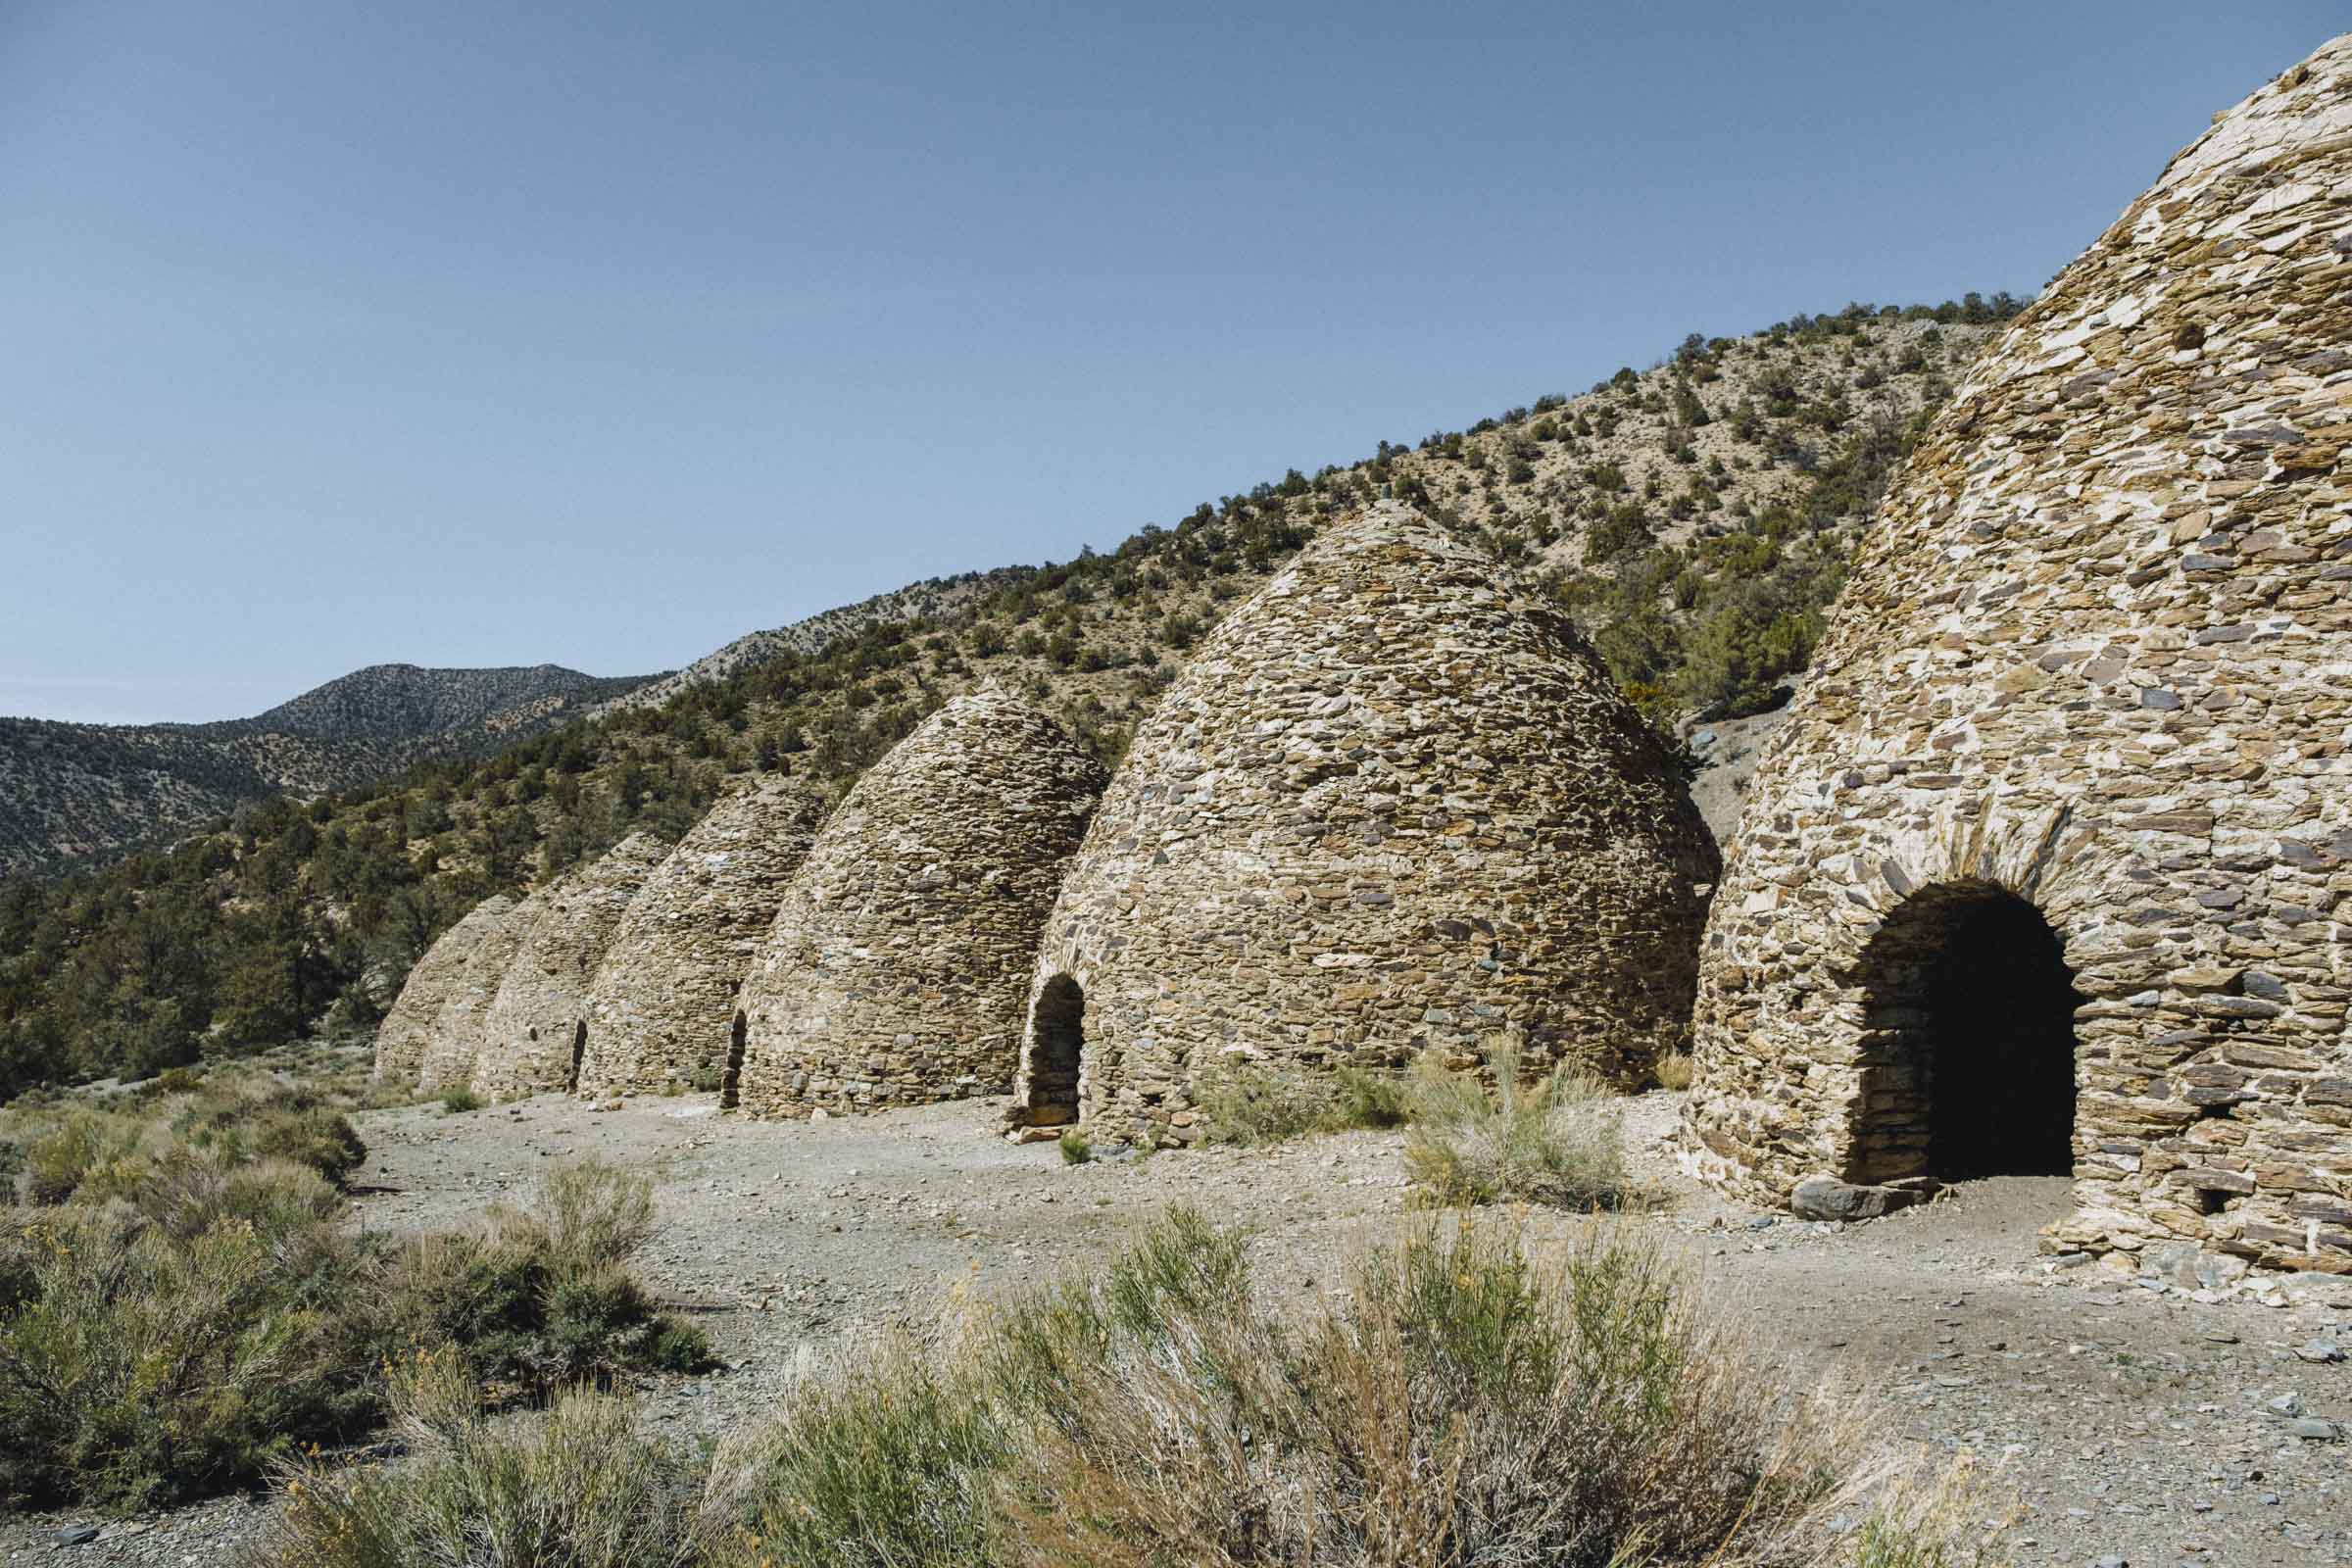 The charcoal kilns in the Panamint Mountains above Death Valley